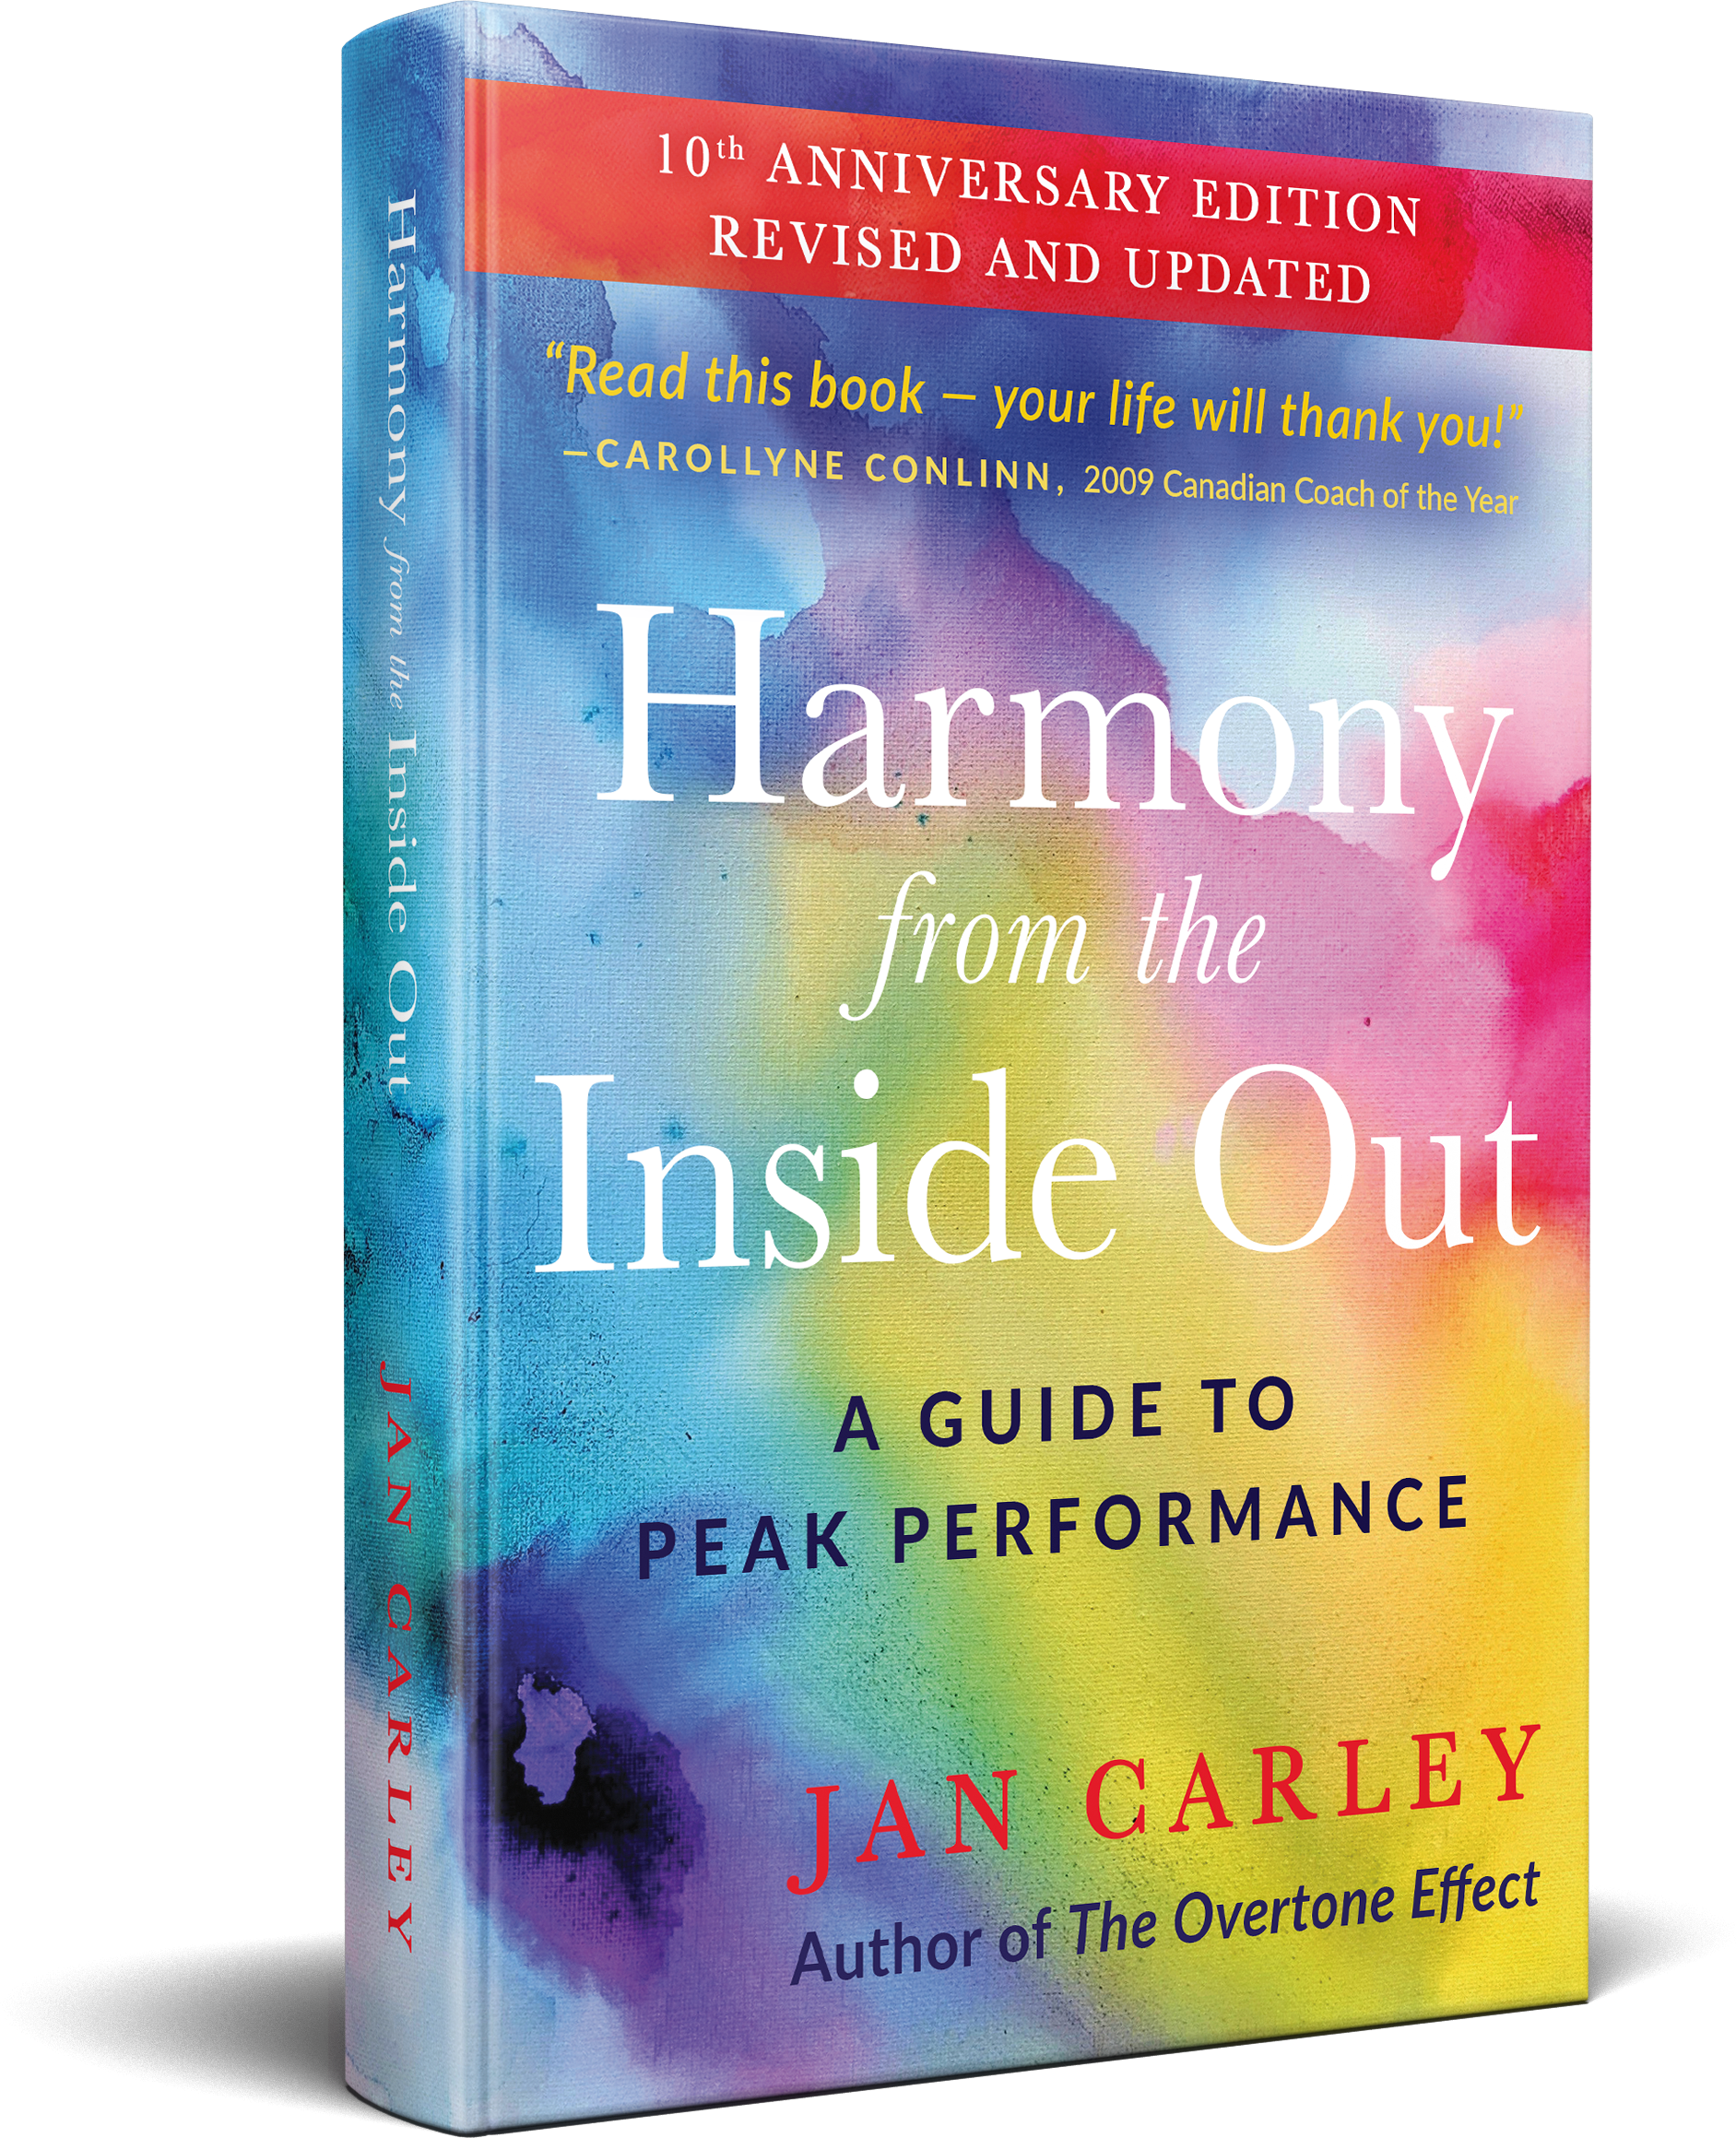 Harmony from the inside out 10th Anniversary Edition